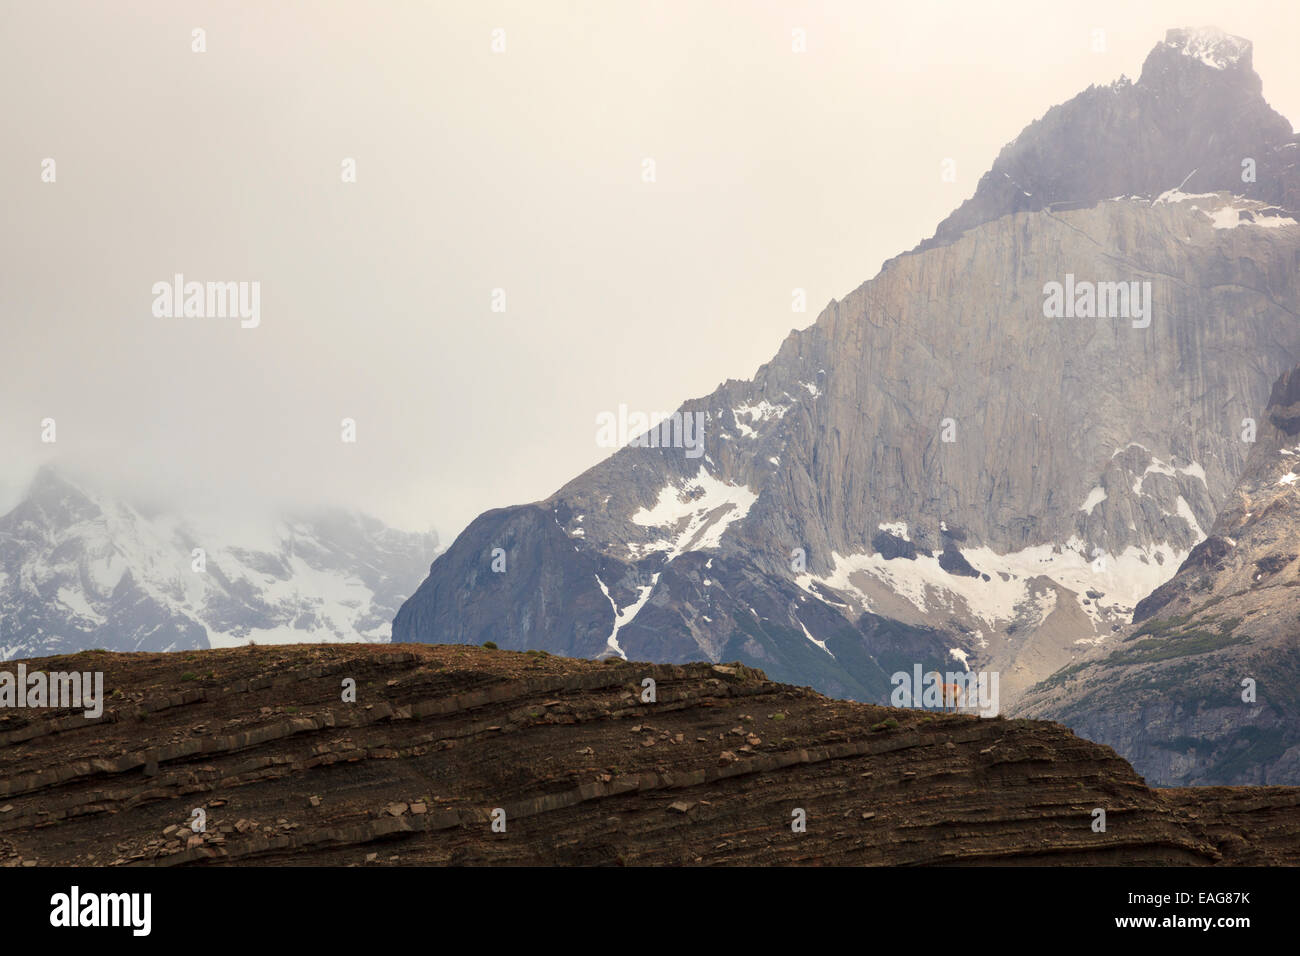 Guanaco on a hill in landscape, Torres Del Paine National Park, Patagonia, Chile Stock Photo